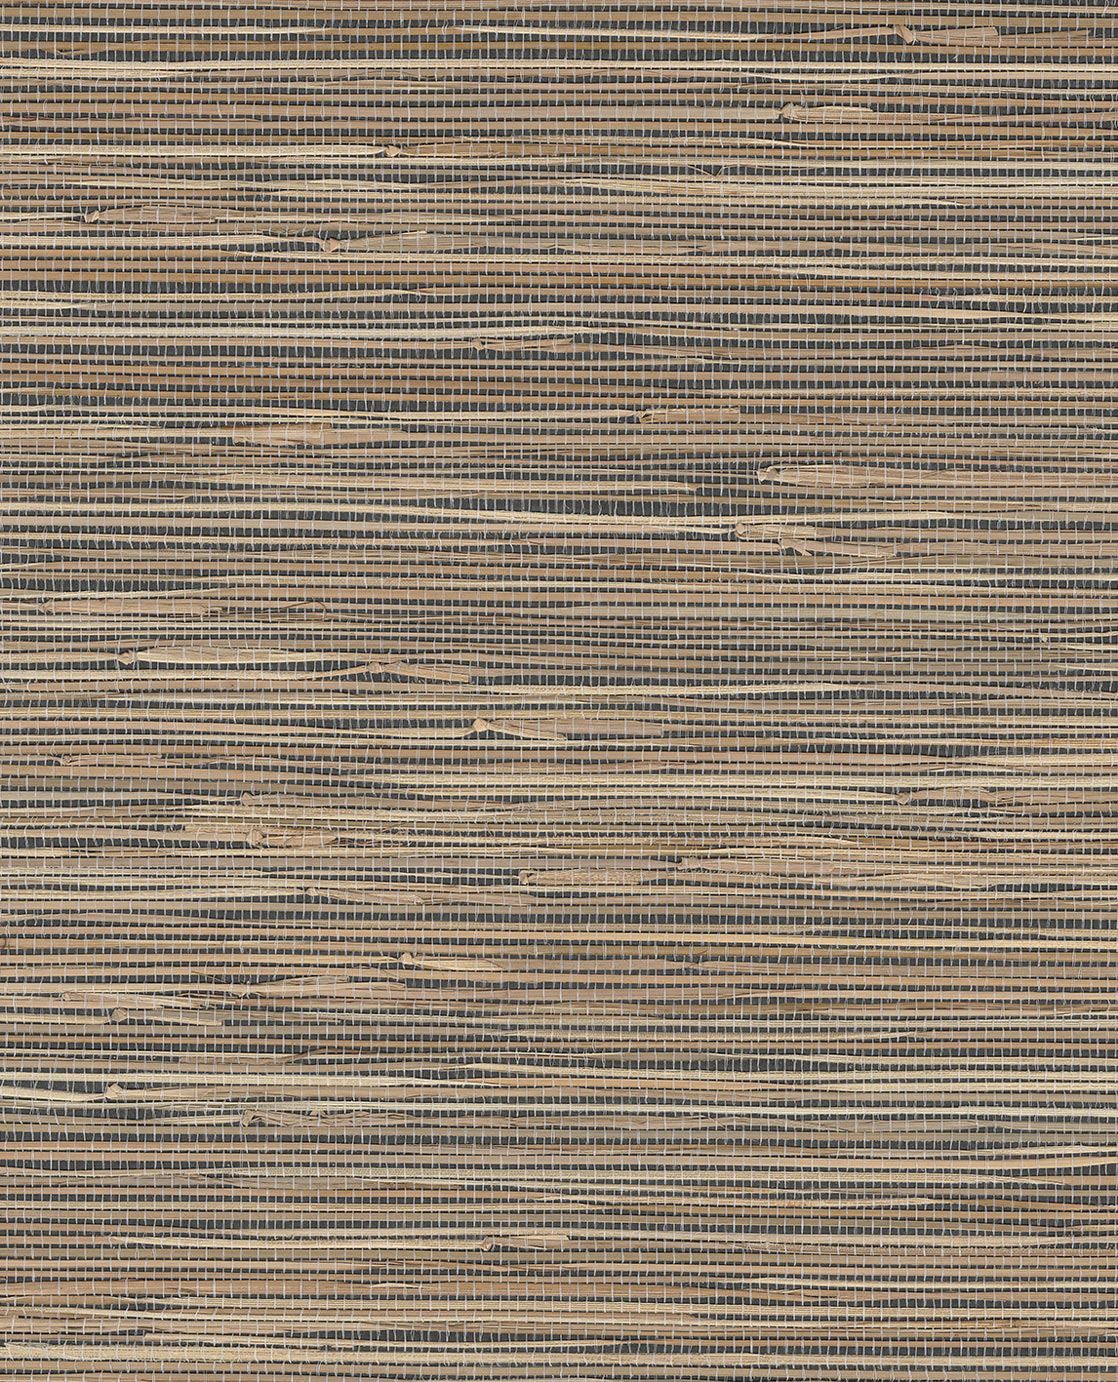 Opsommen Tether excuus Eijffinger - NATURAL WALLCOVERINGS II